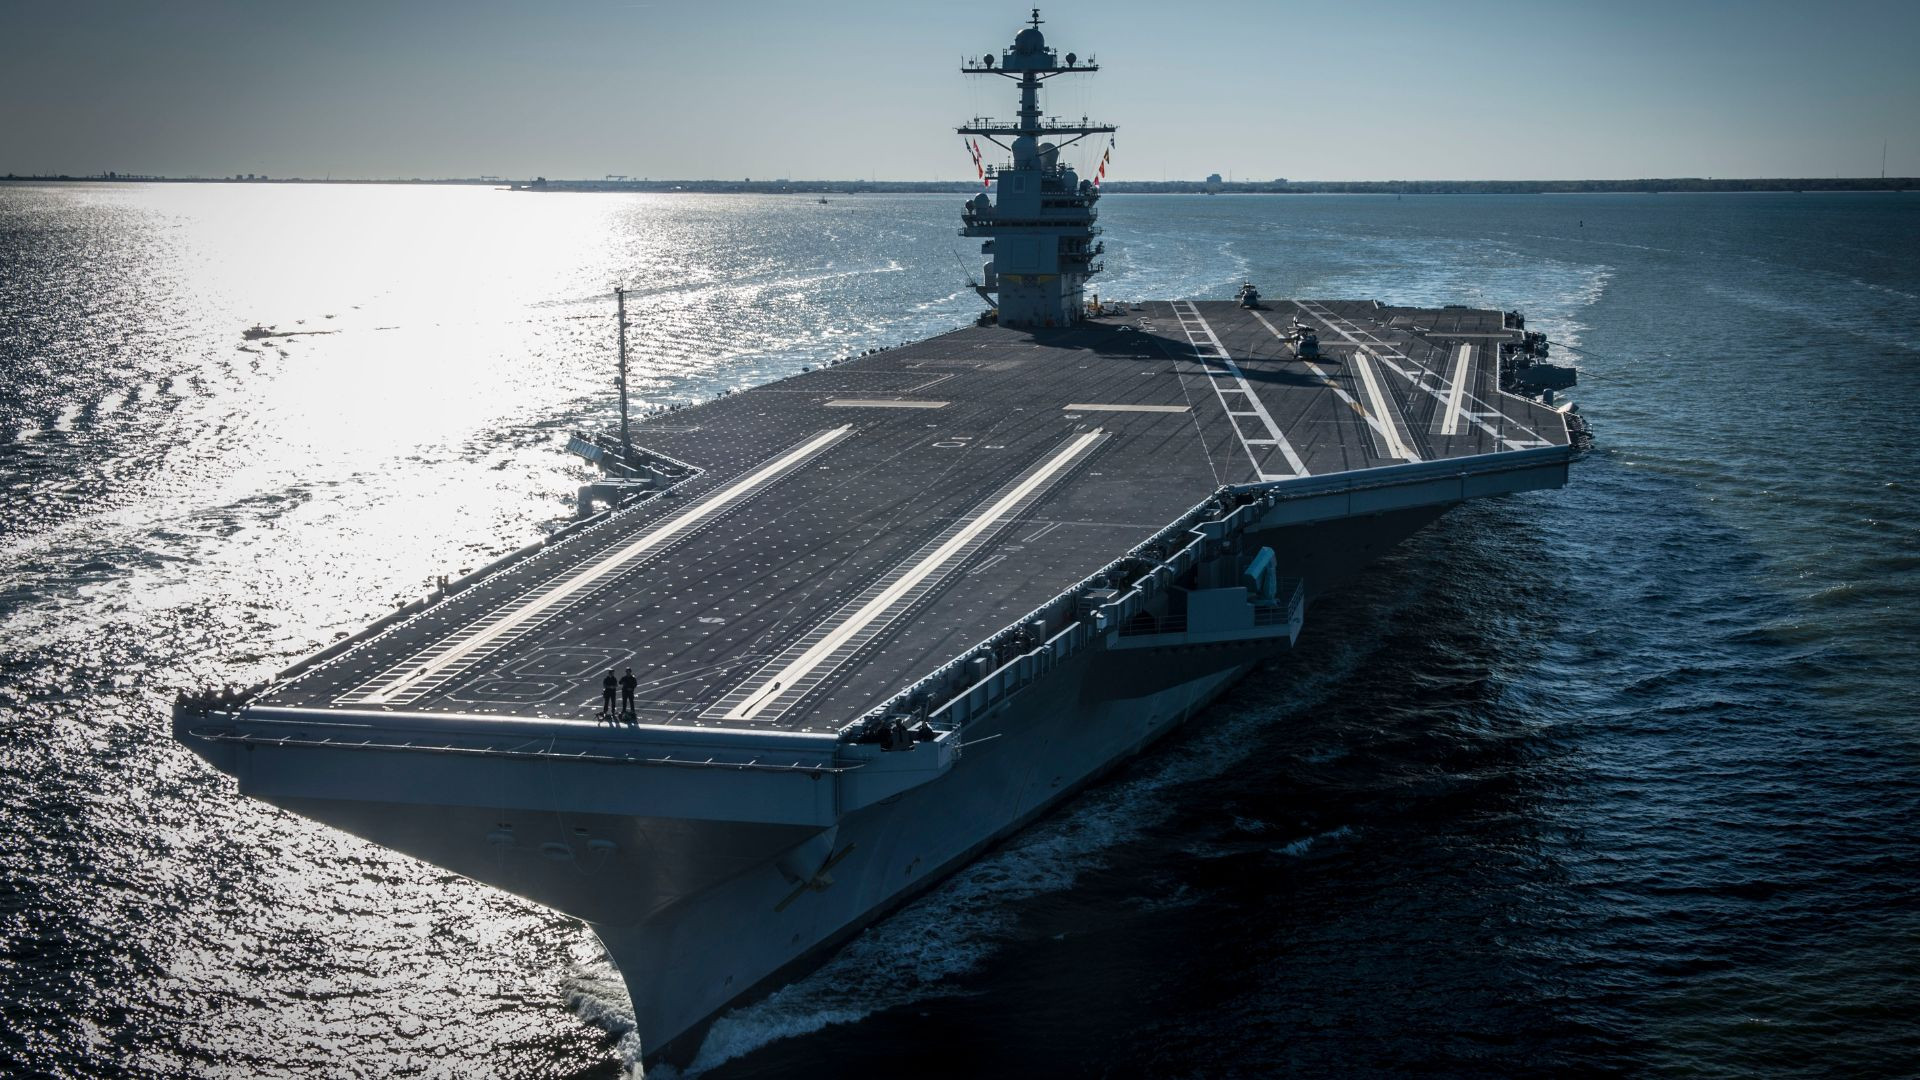 Monday will see US’s most sophisticated aircraft carrier deployed to